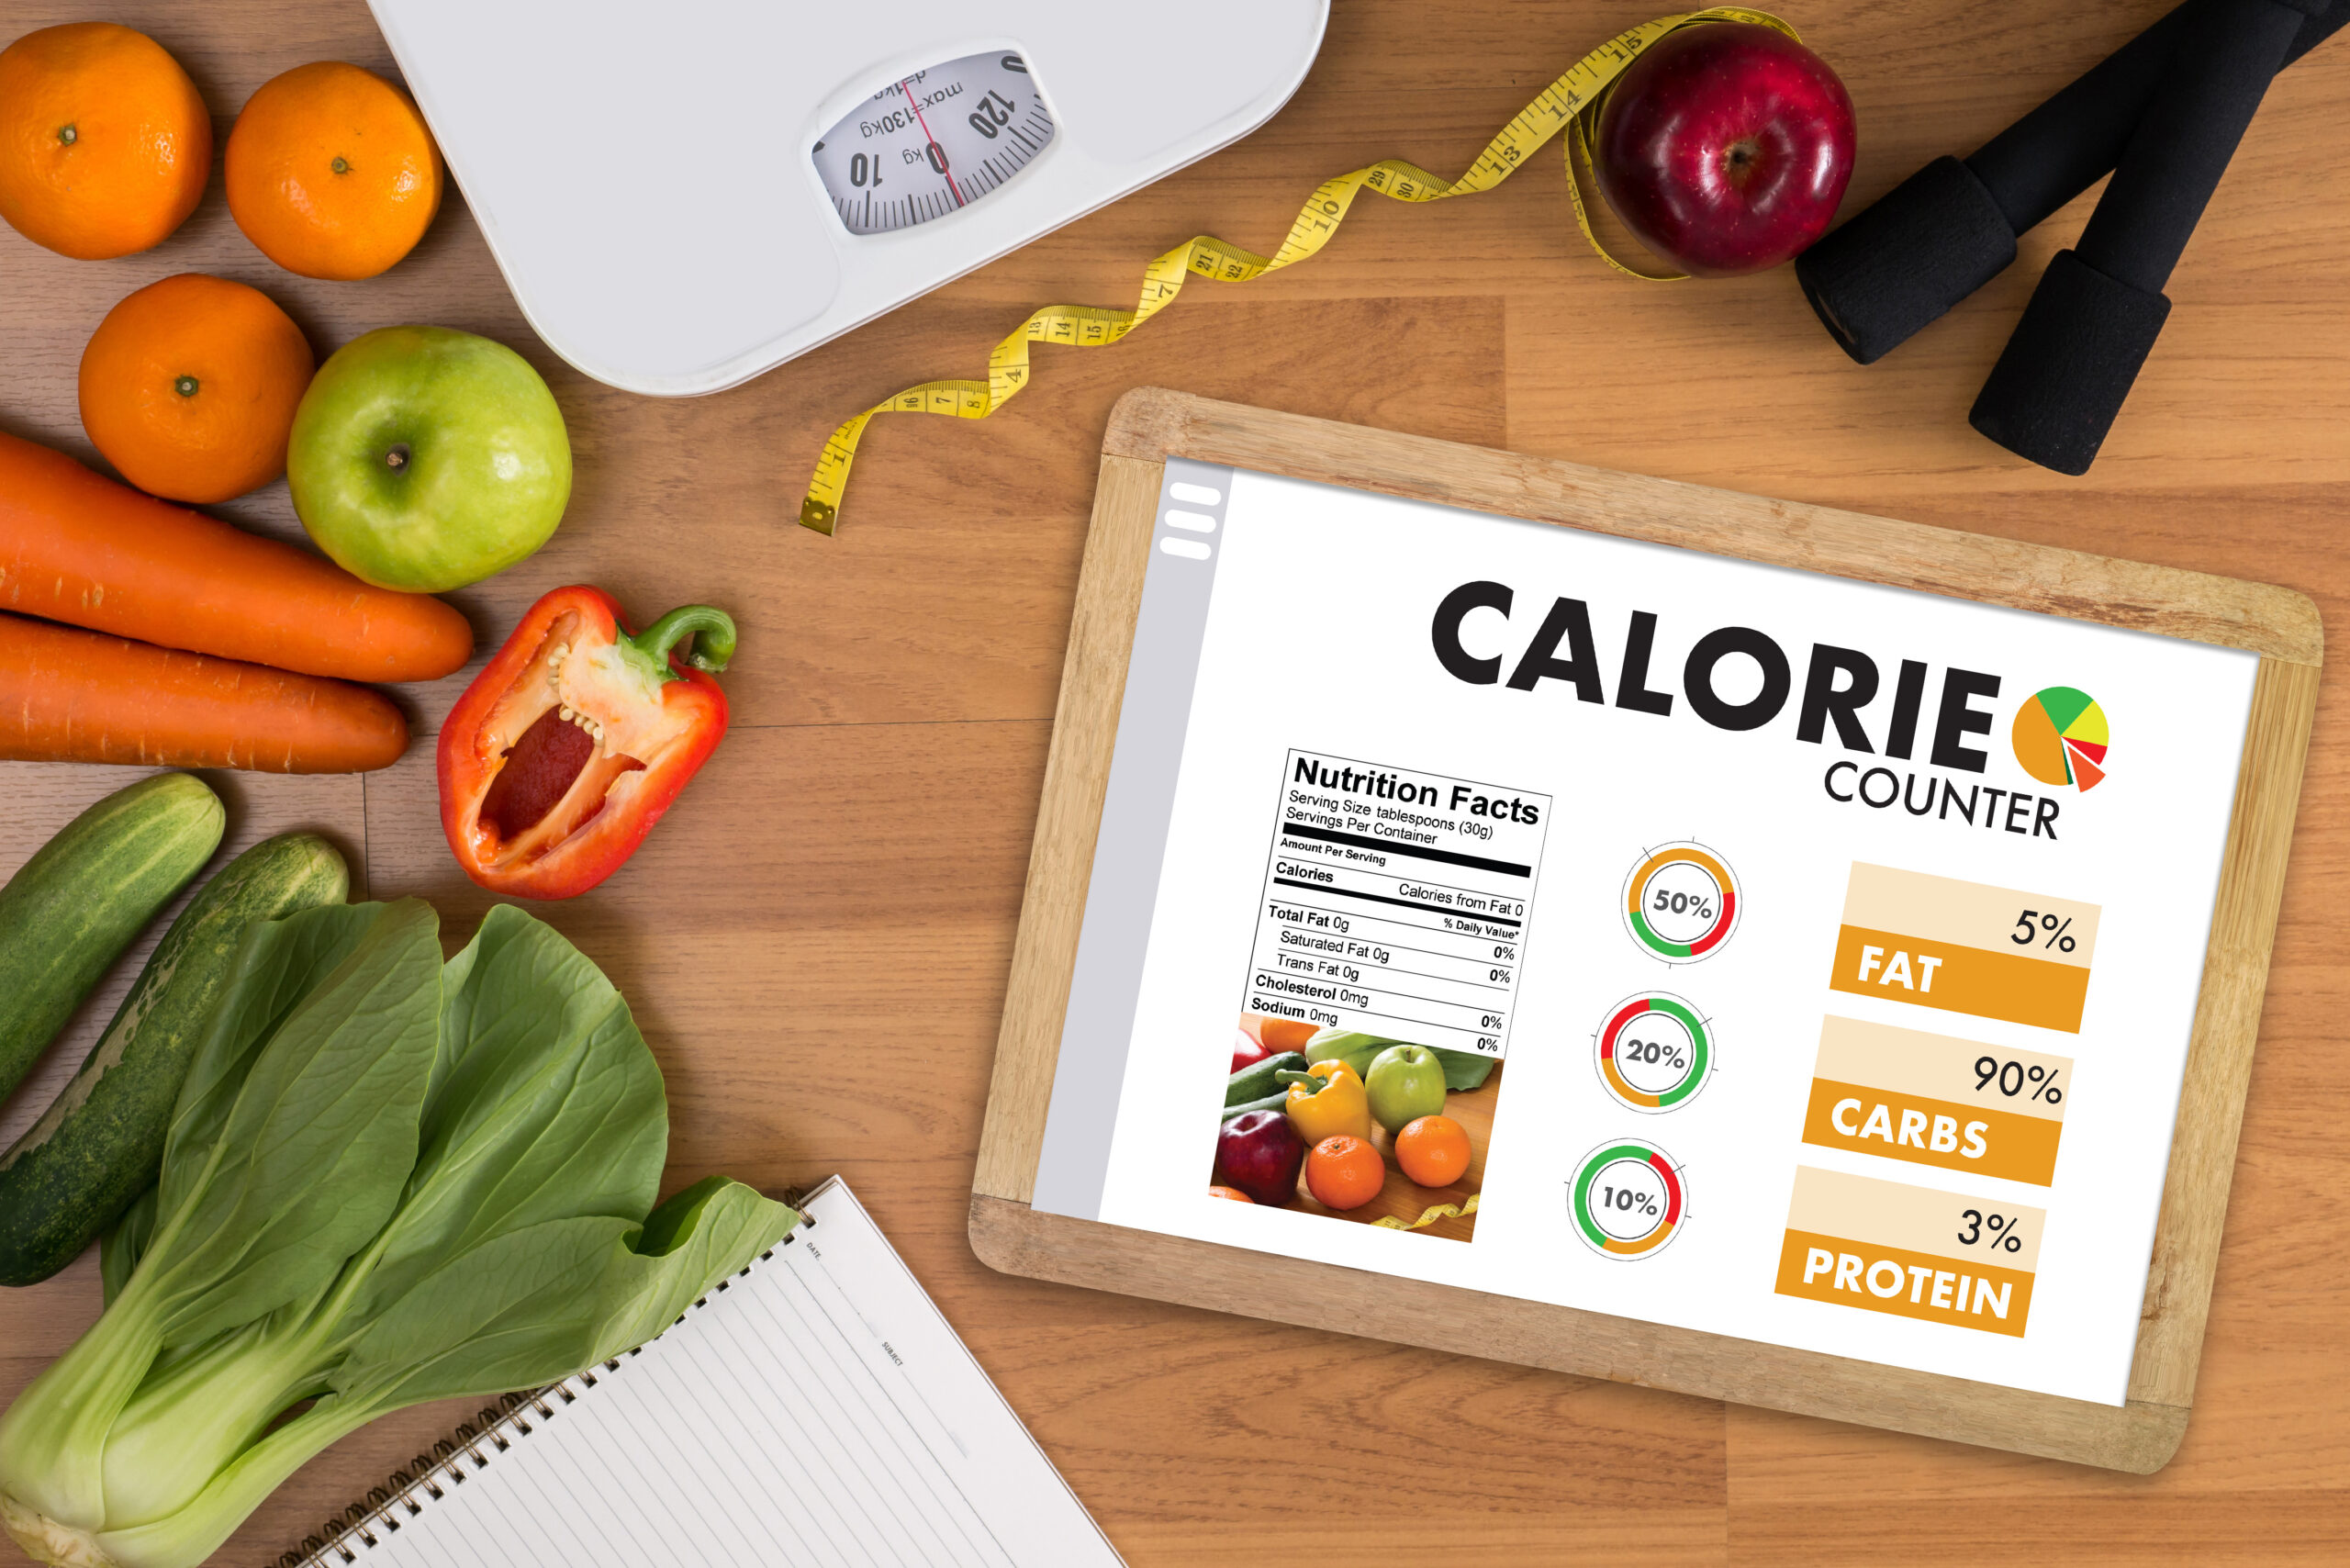 â€˜Calories in, Calories outâ€™ â€” Does It Really Matter